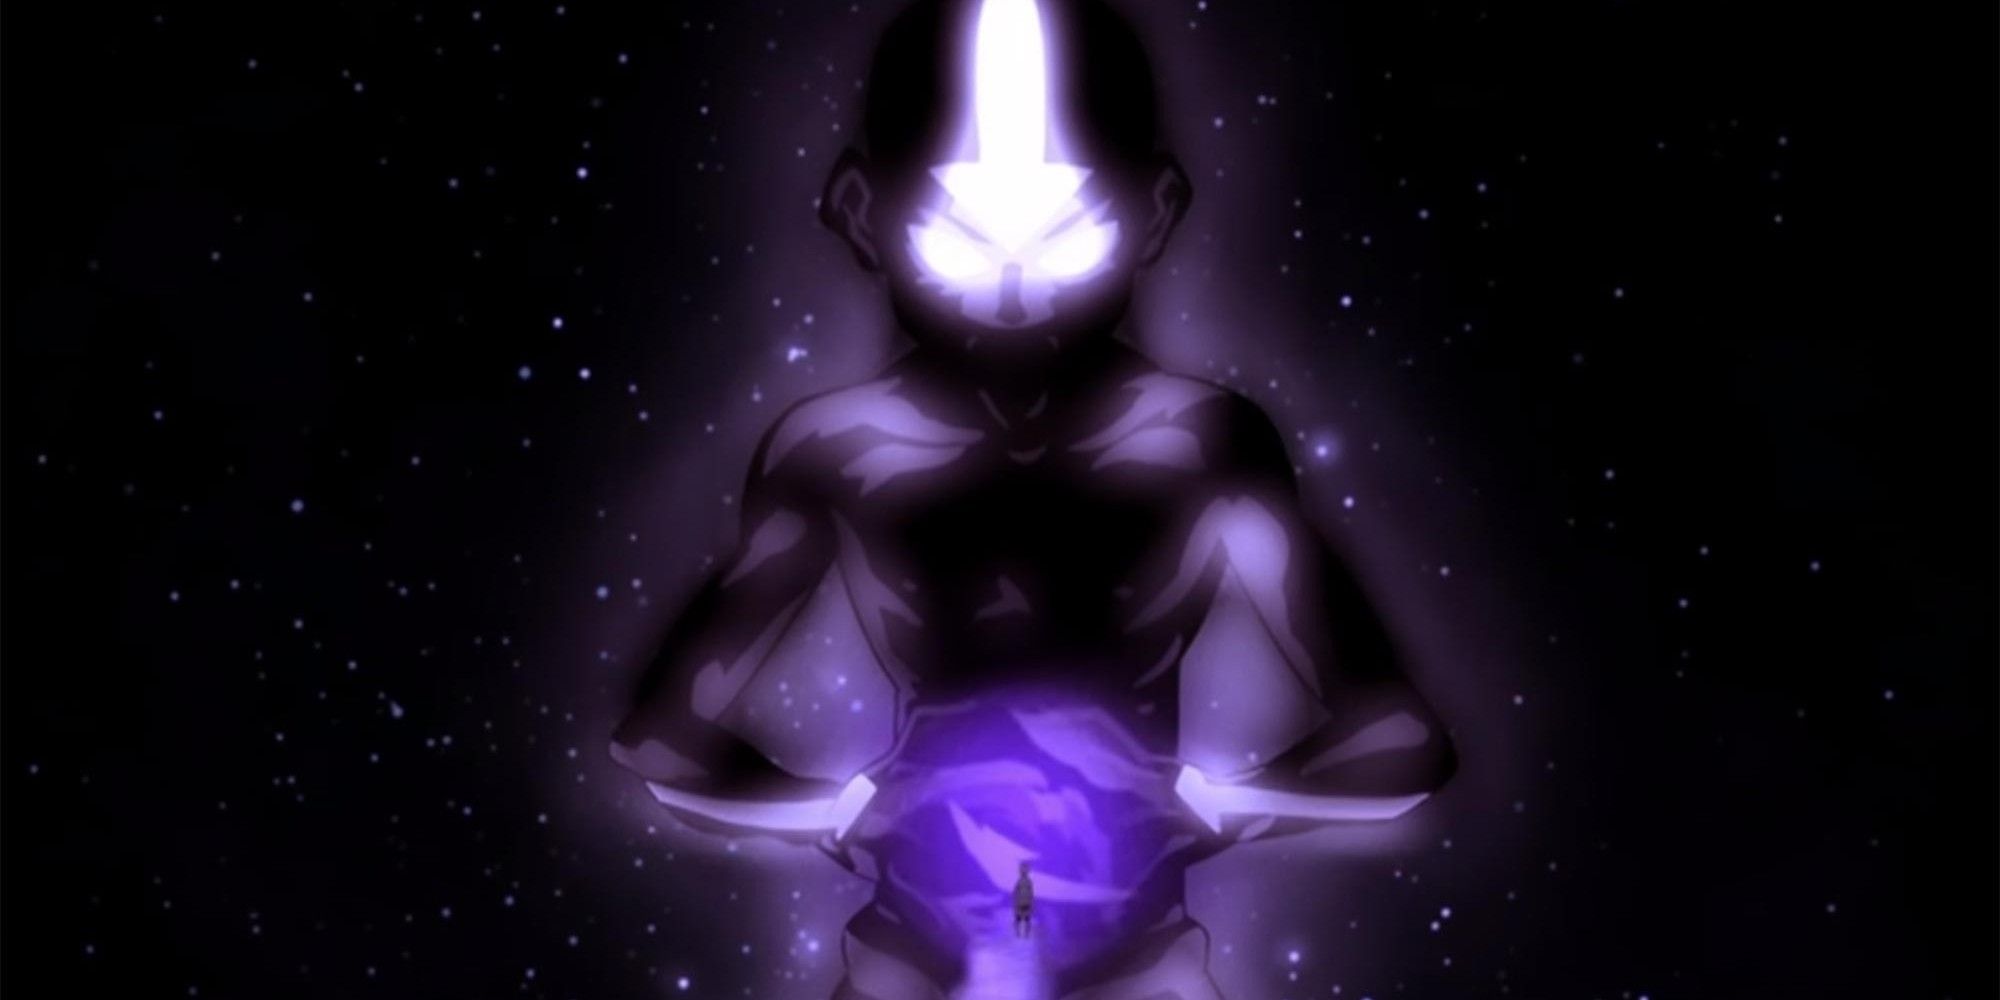 Aang glows with purple light with a starry background behind him